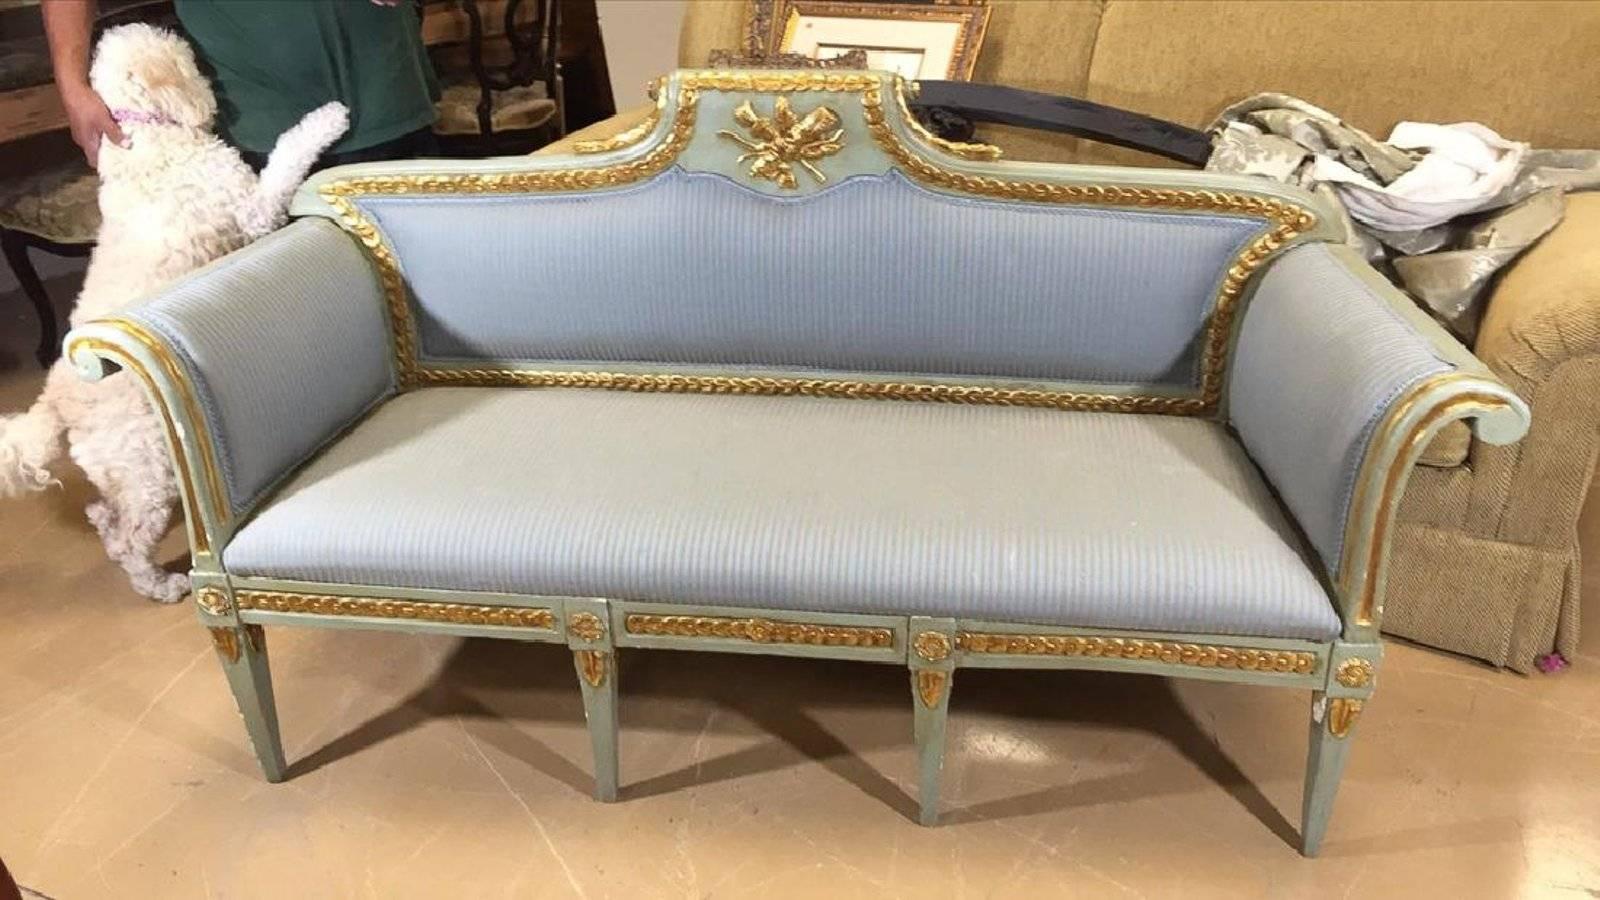 Italian painted sofa from Venice, with symbol of love carving, gold gilt highlights, 18th century.
  